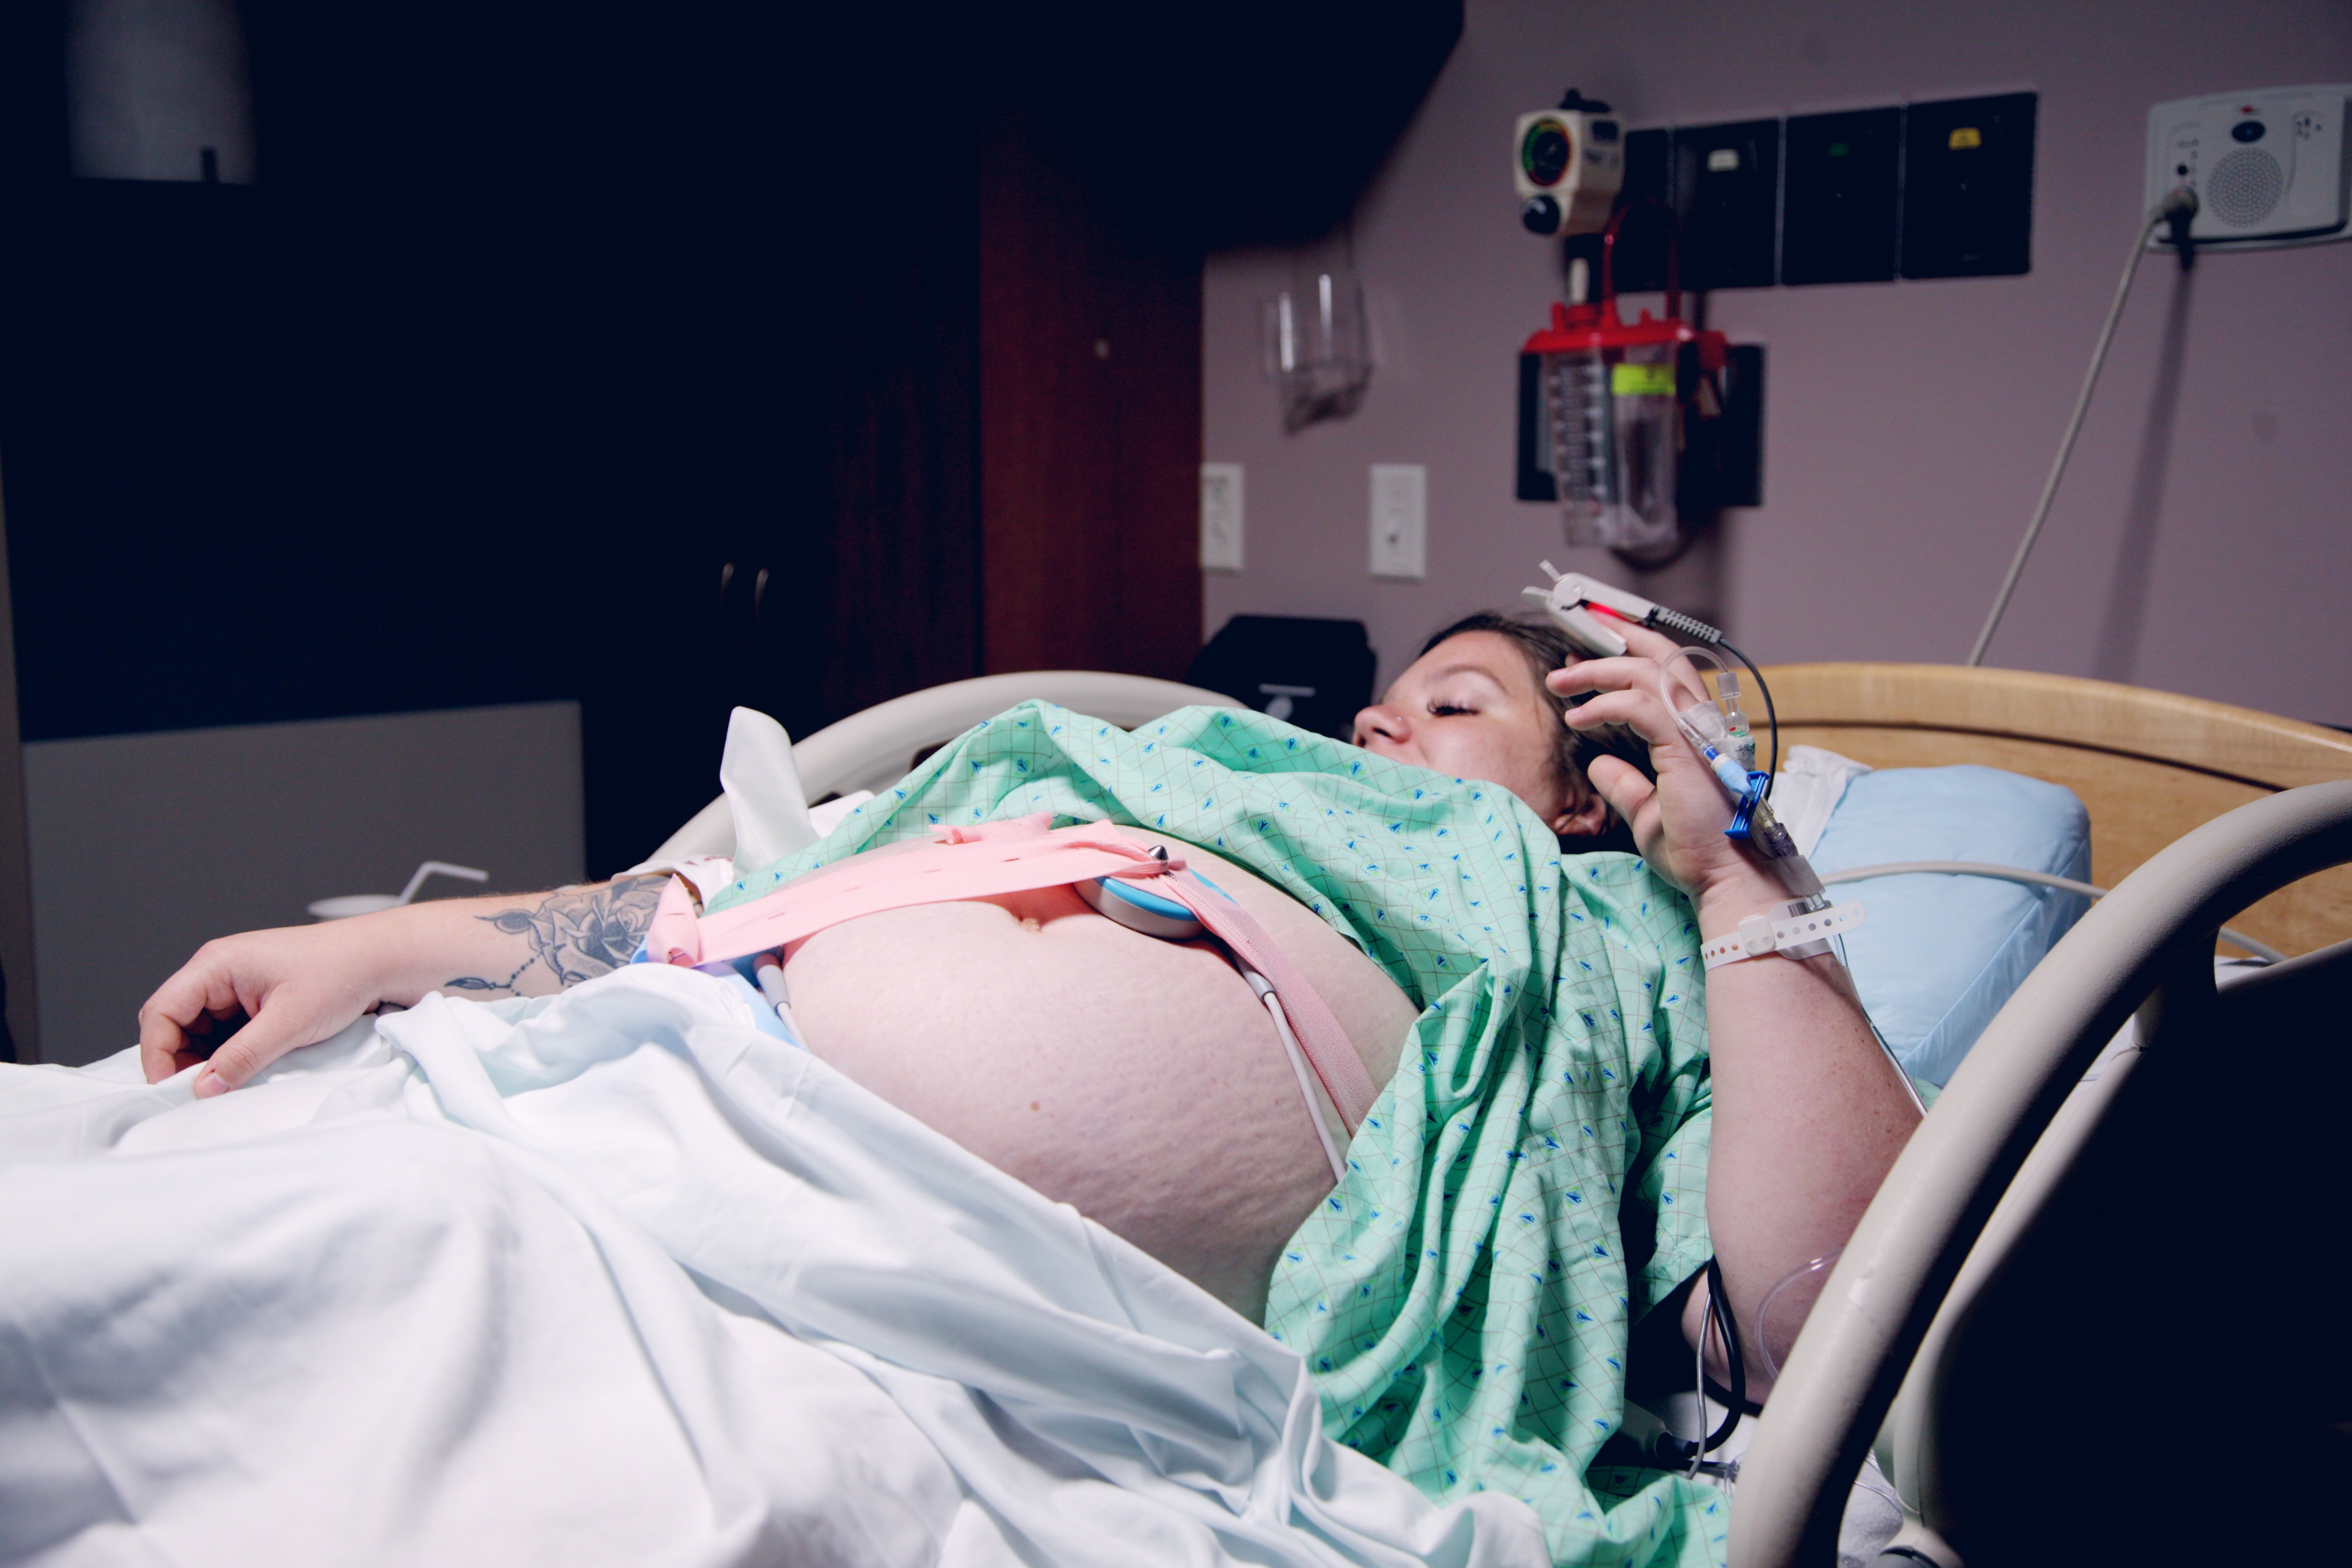 An expecting mother in the delivery room | Source: Unsplash.com